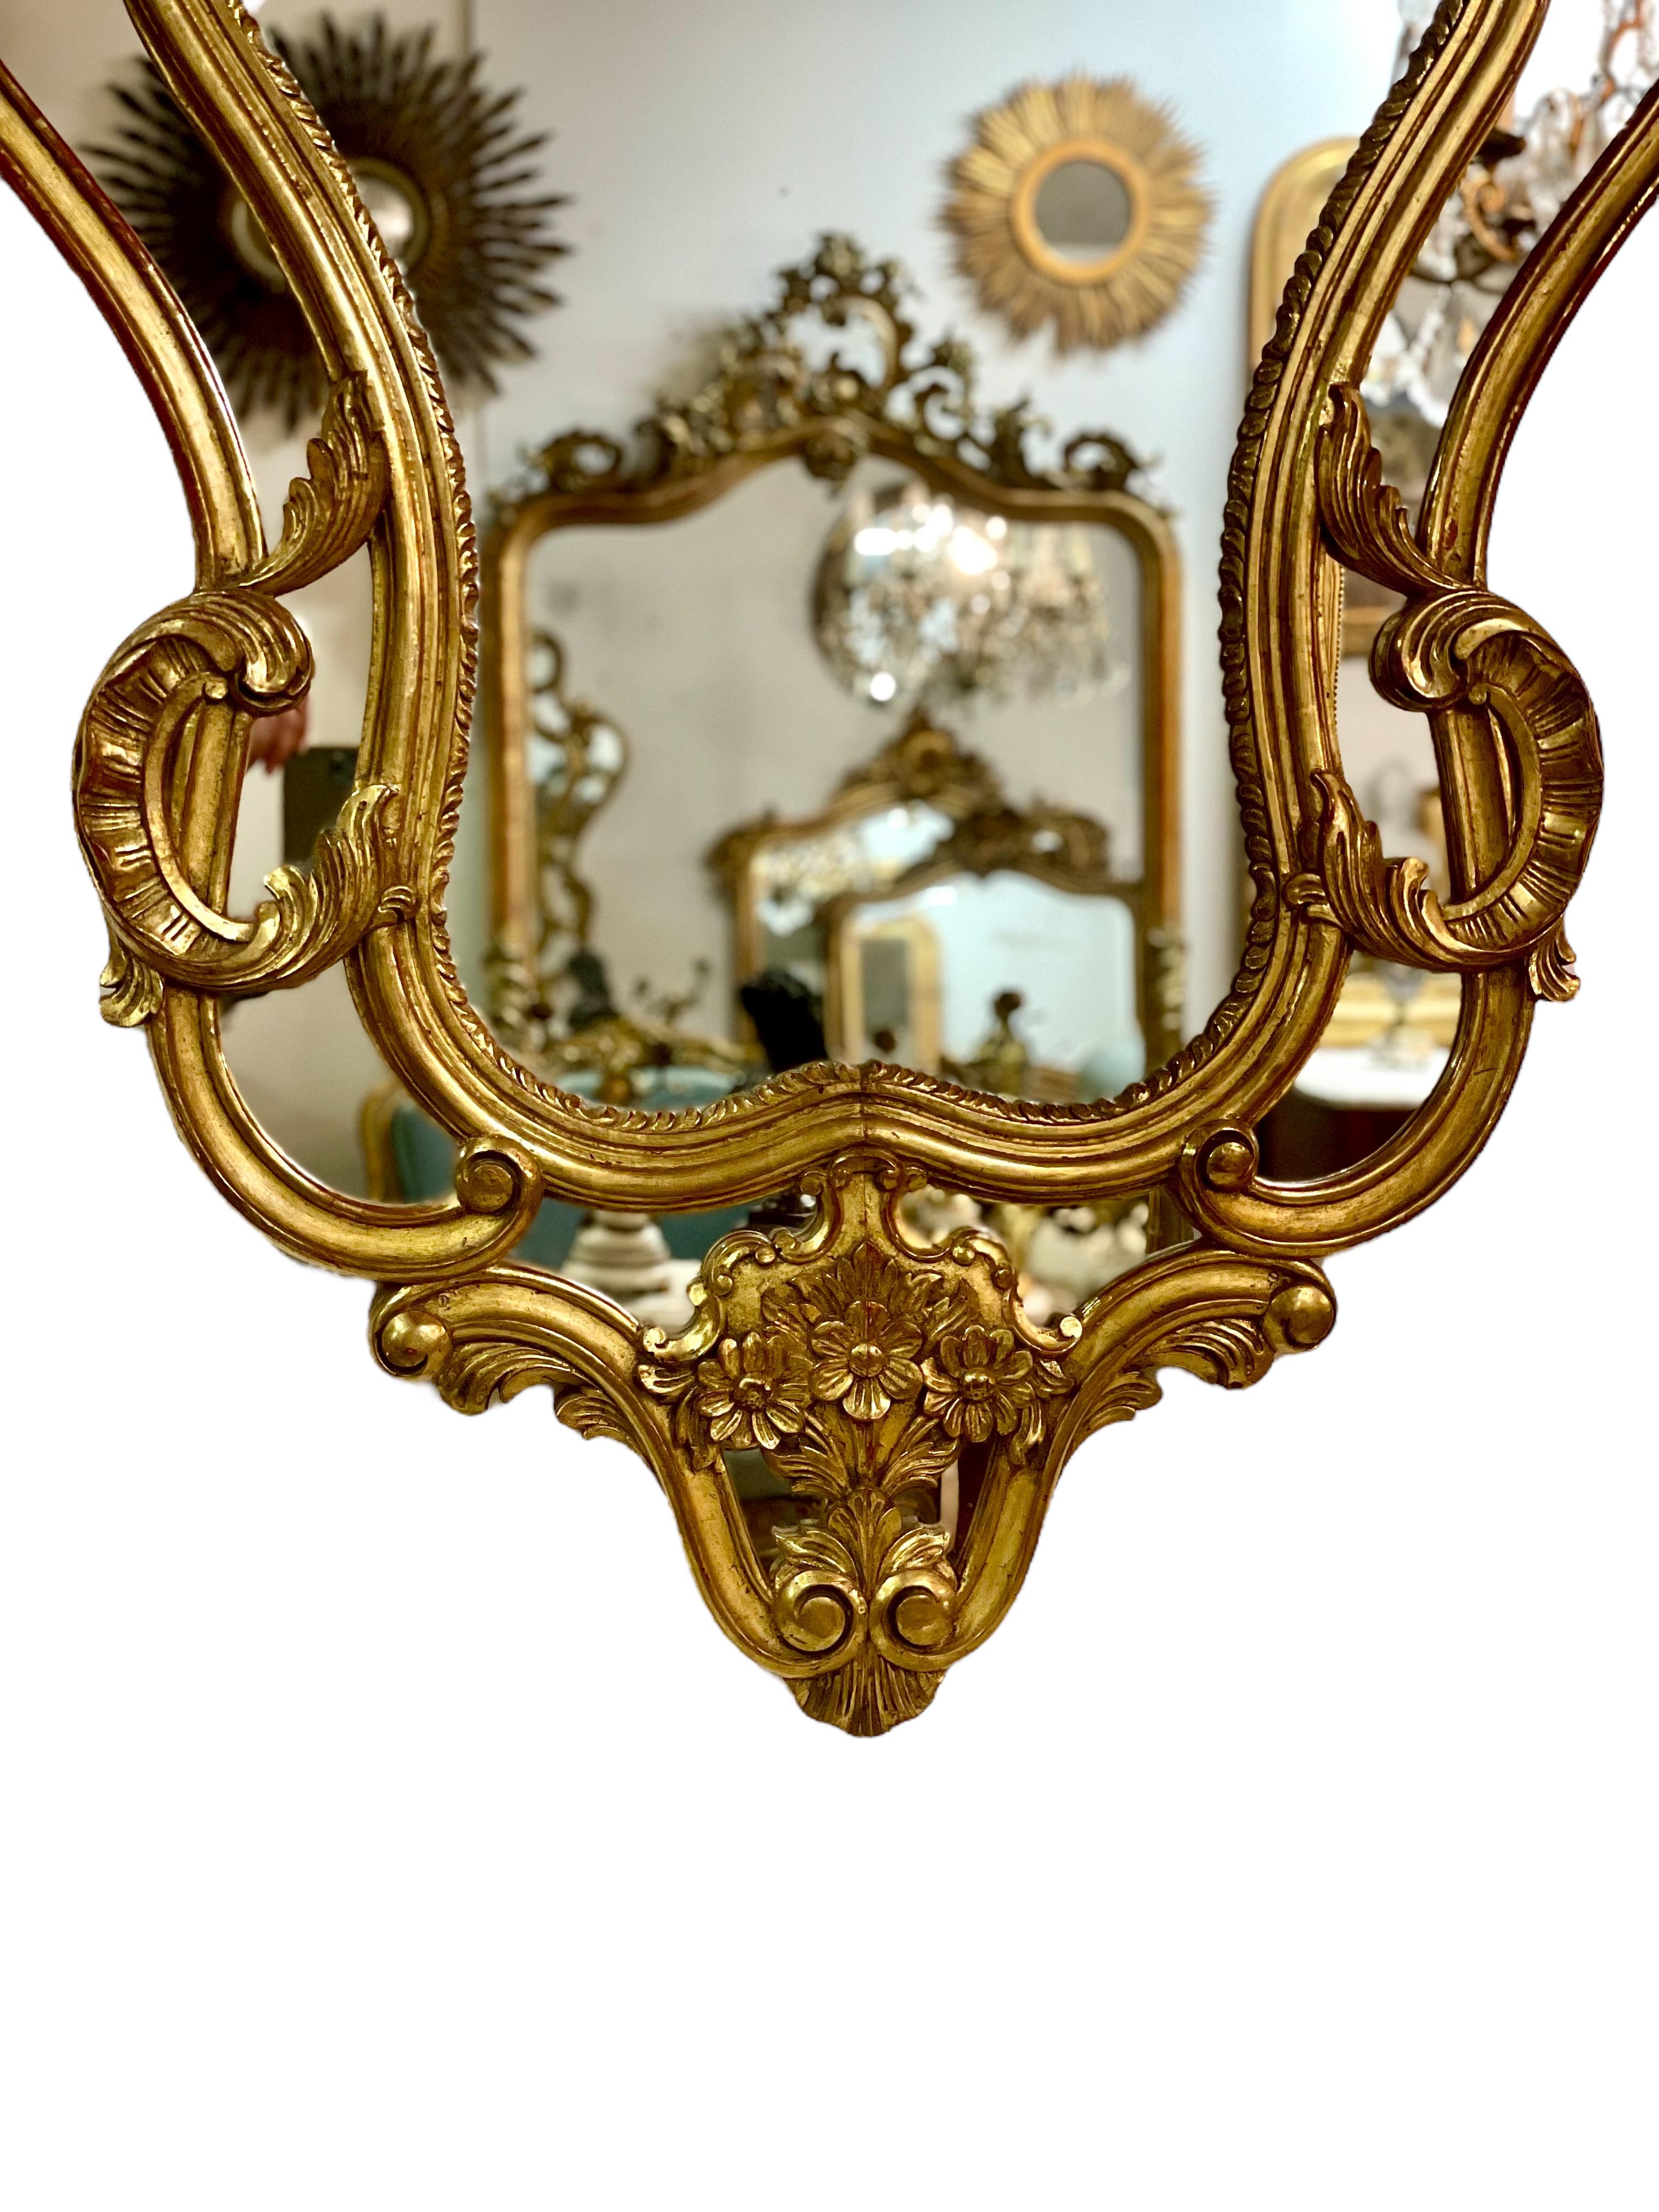 French Large Rococo Style Gilt Wall Mirror with Parecloses For Sale 3